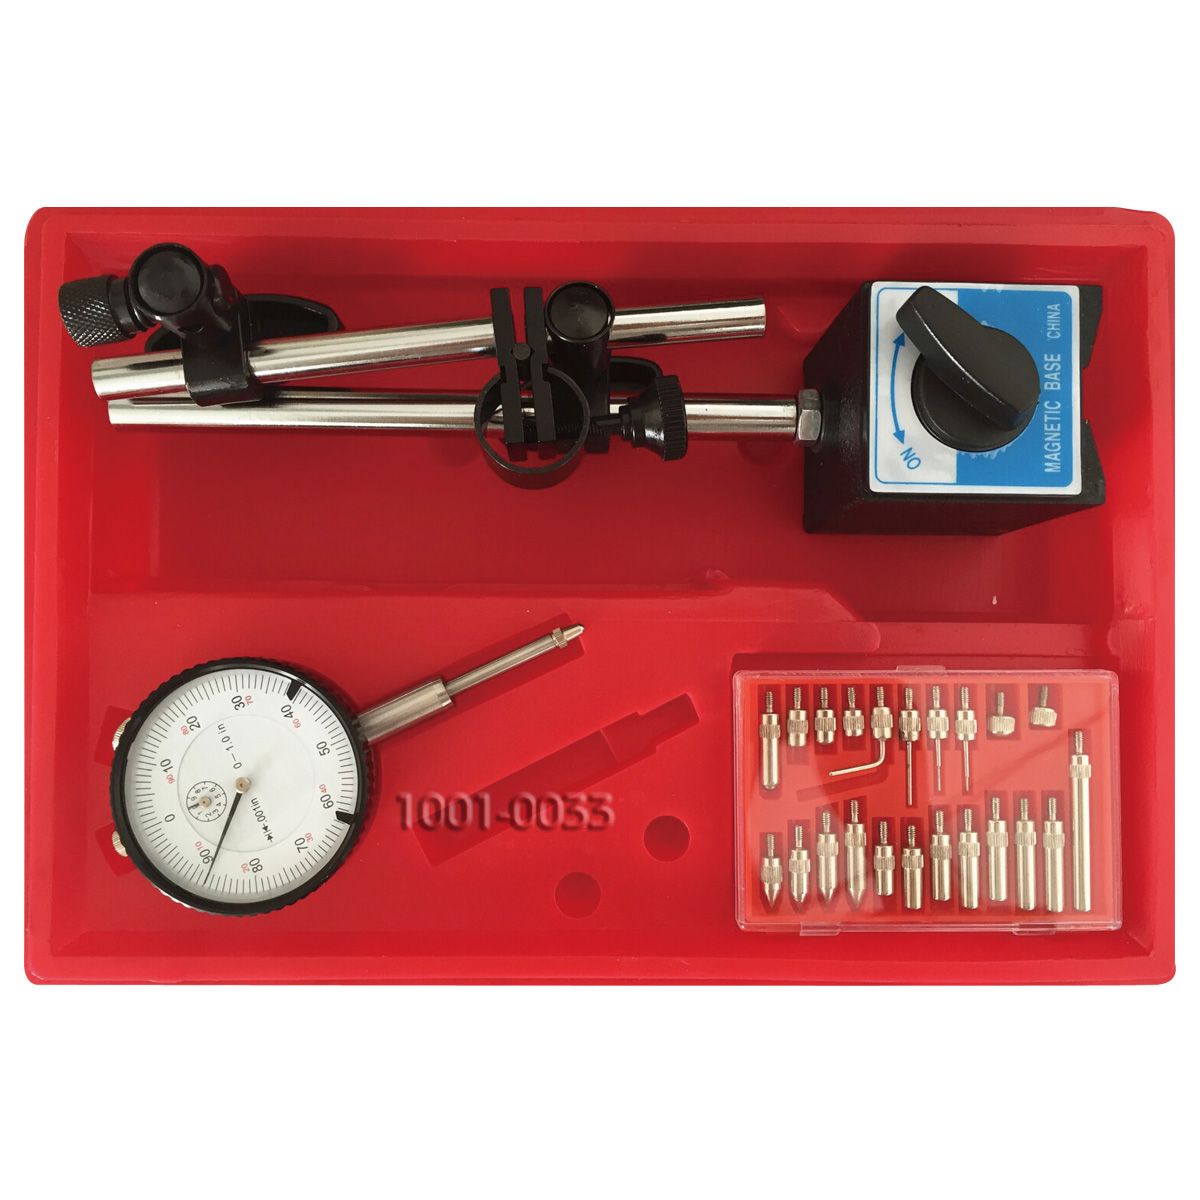 3 PIECE TOOL KIT WITH INDICATOR POINT SET & MAGNETIC BASE (4902-0012)